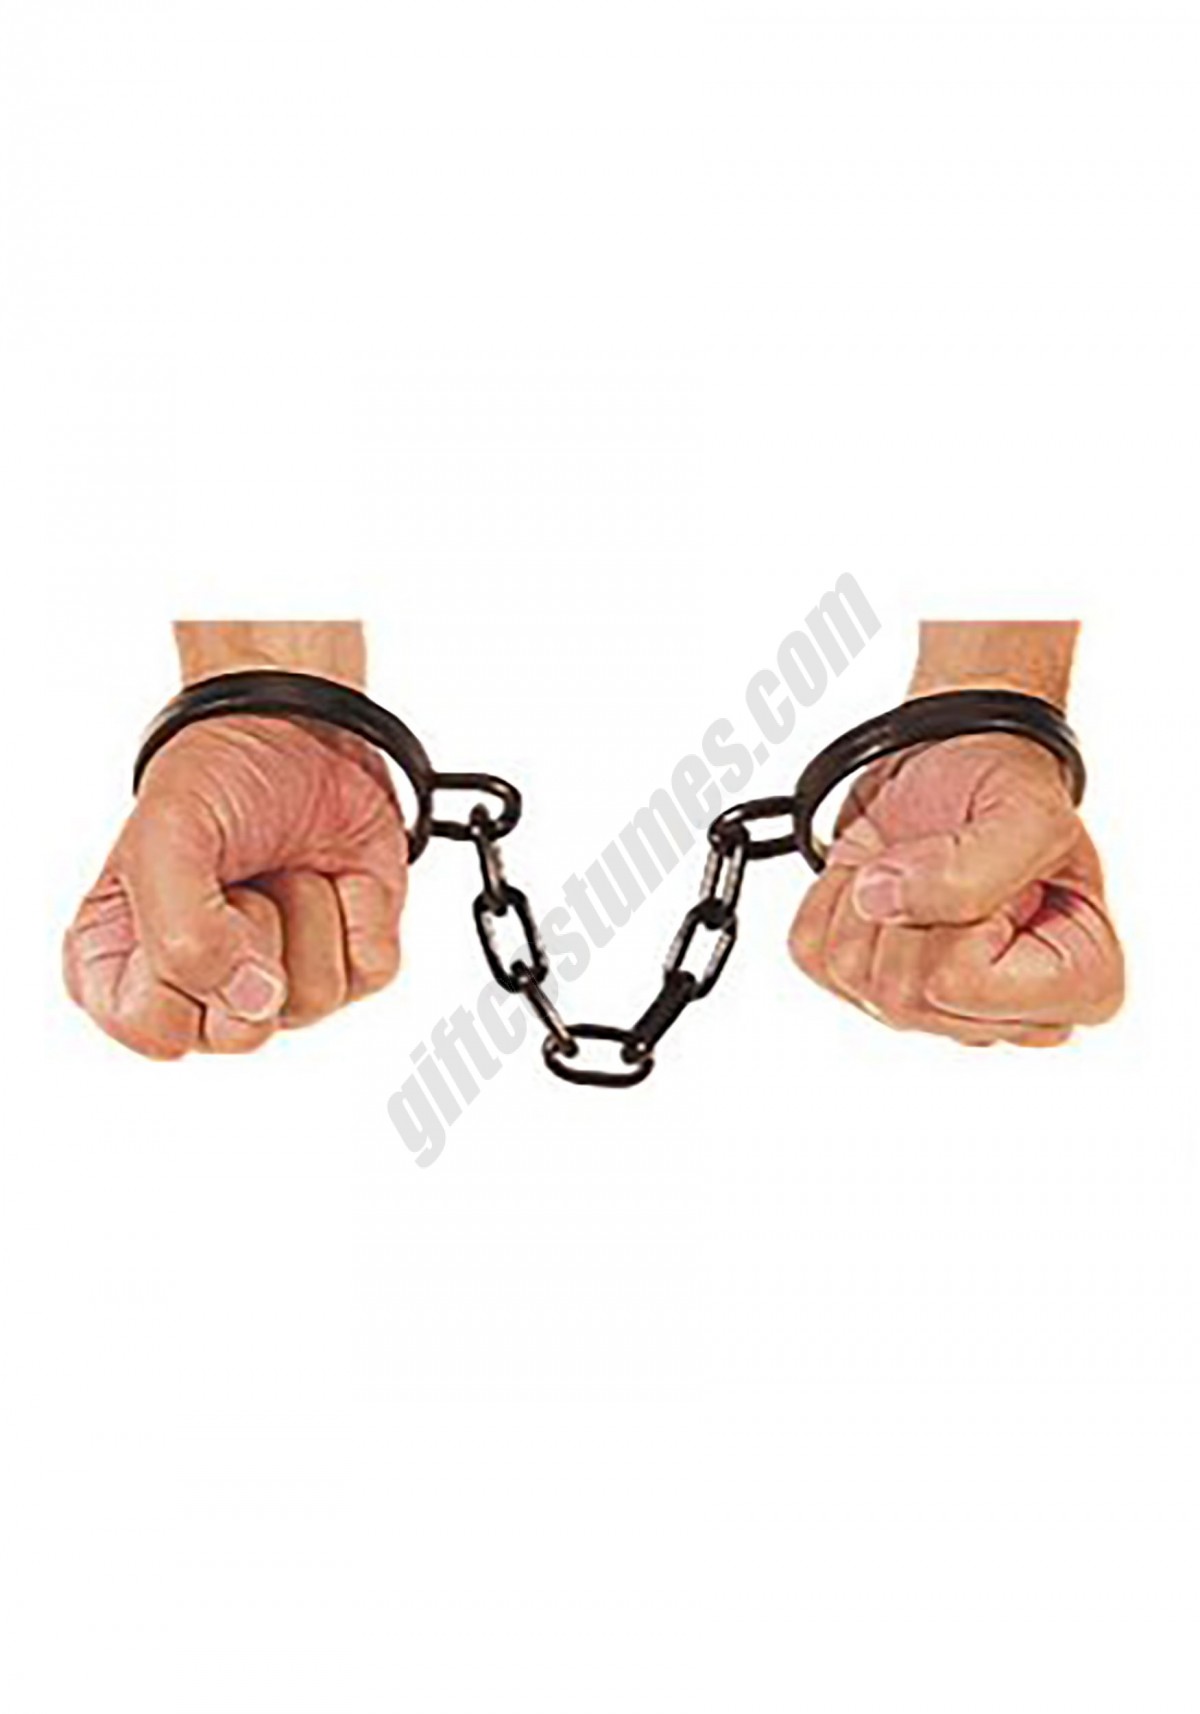 Wrist Shackles Promotions - -0